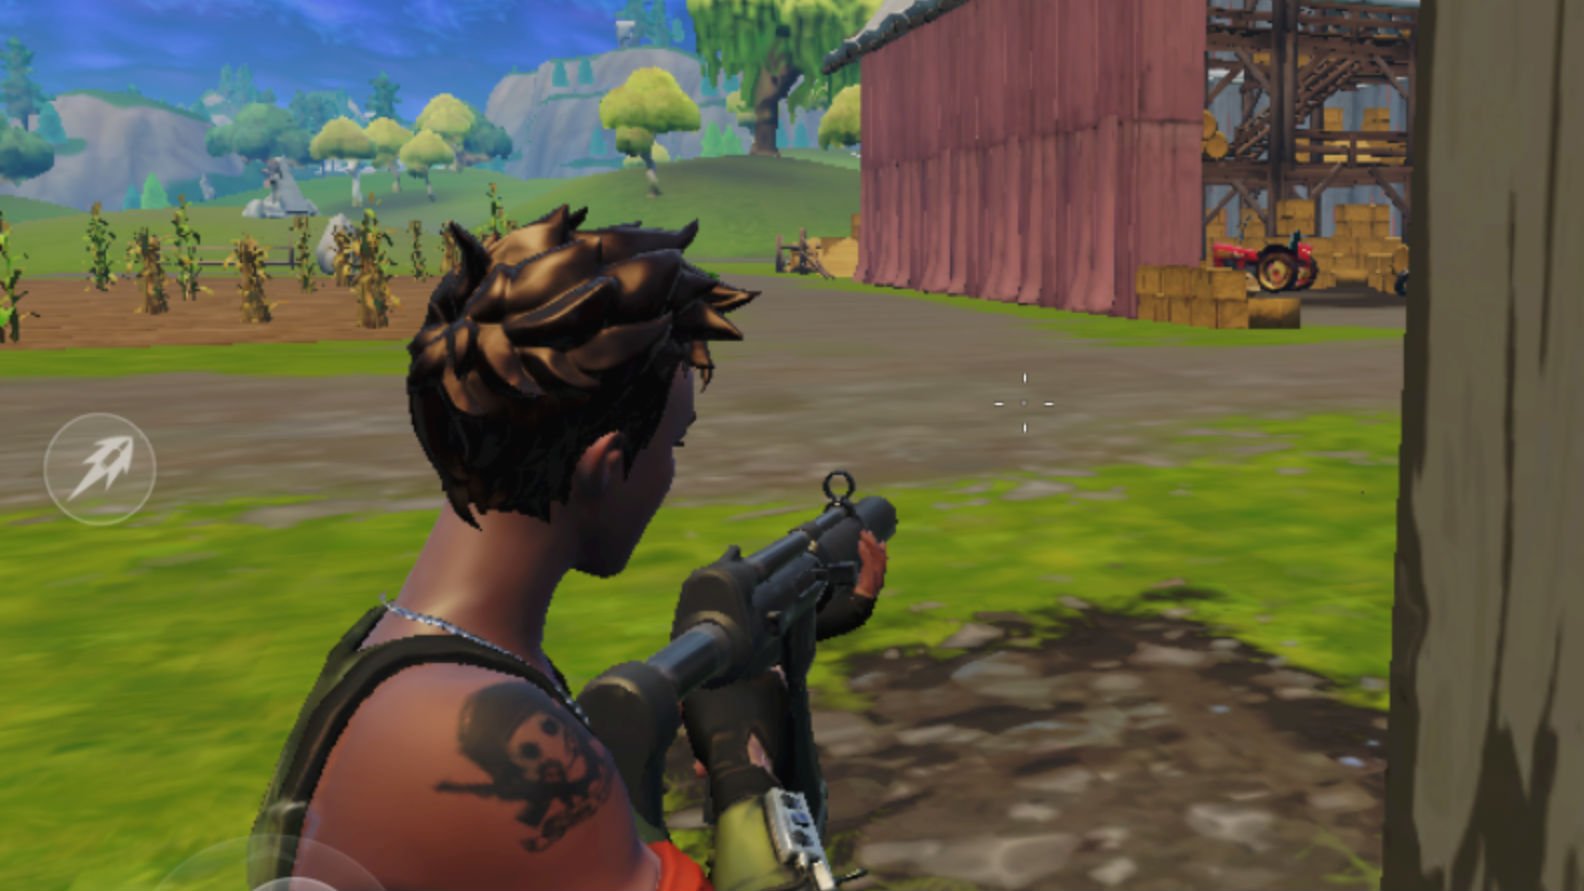 Fortnite mobile combat tips, hints and cheats